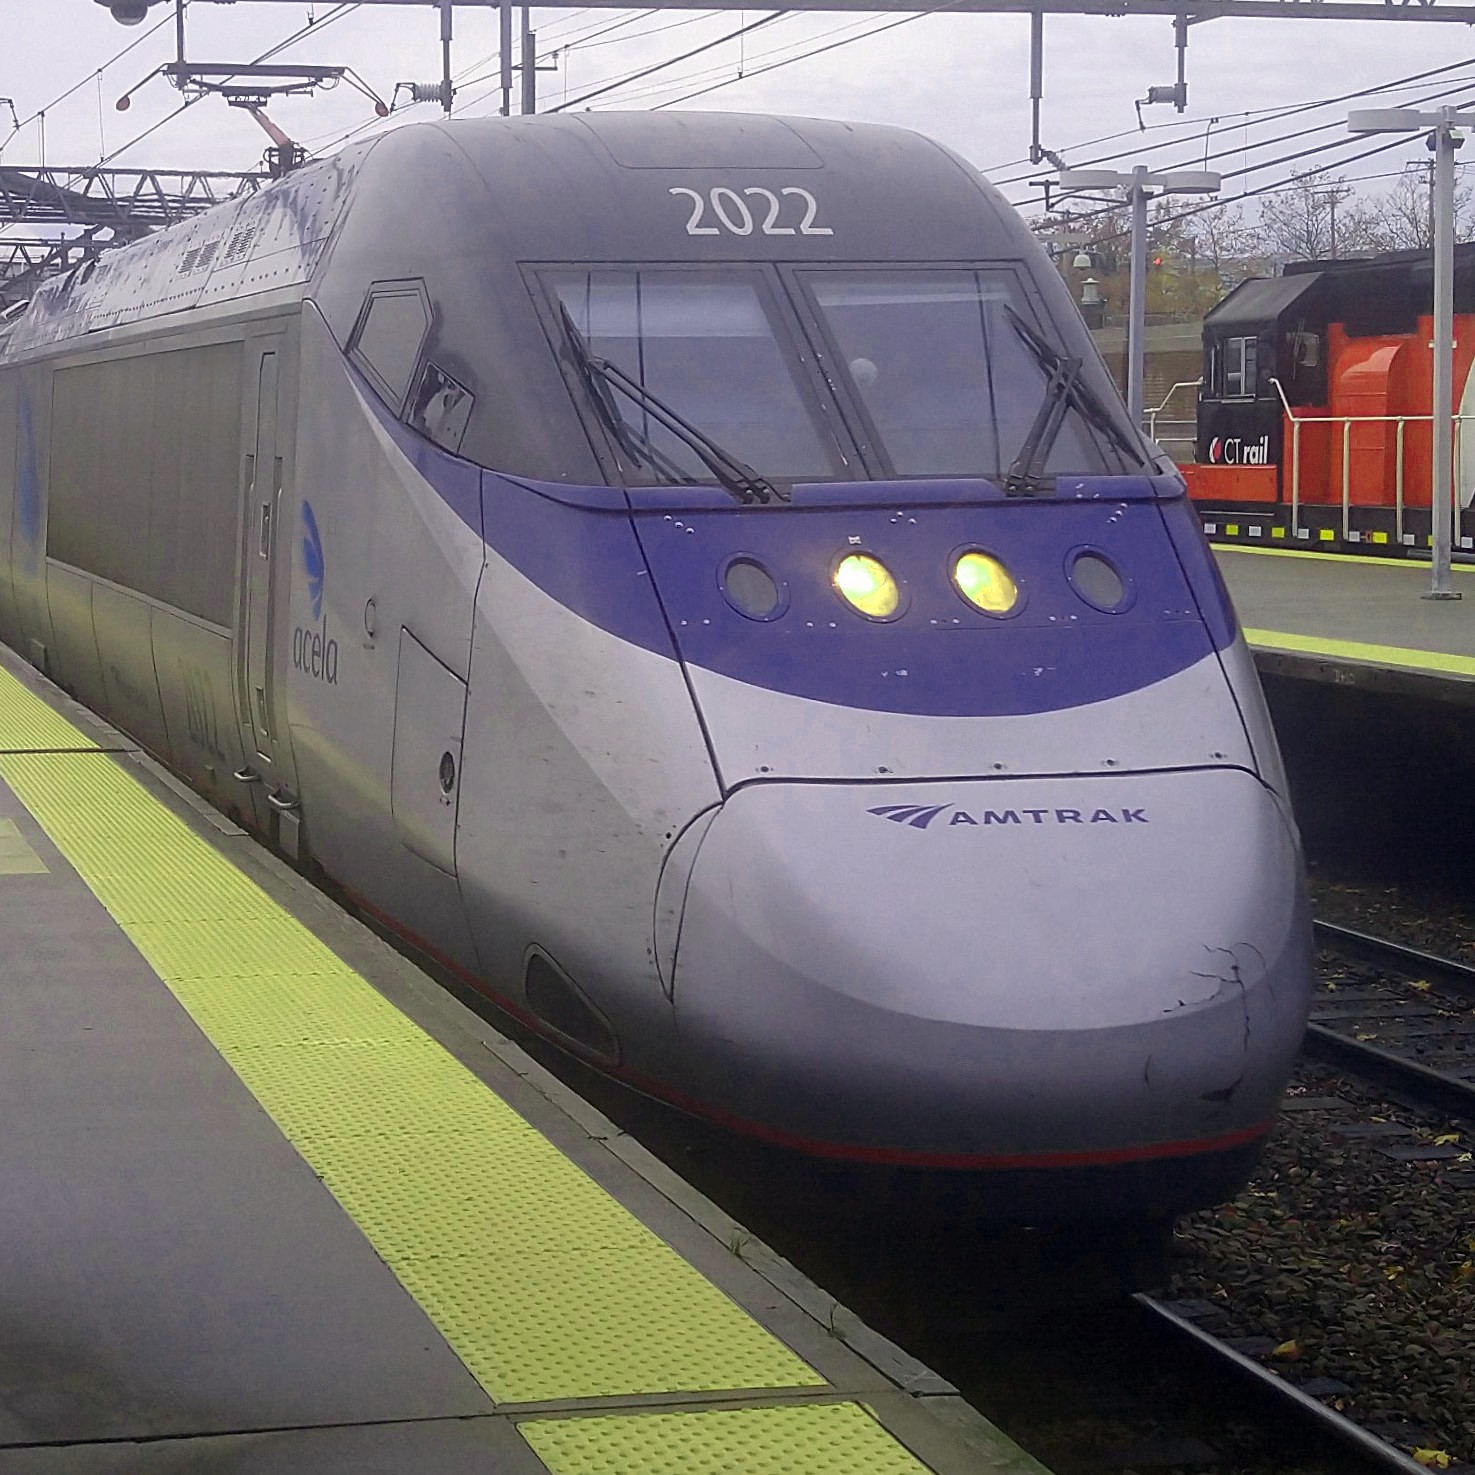 Power car 2022 pulling my Amtrack Acela service into New Haven on the way to Washington DC.